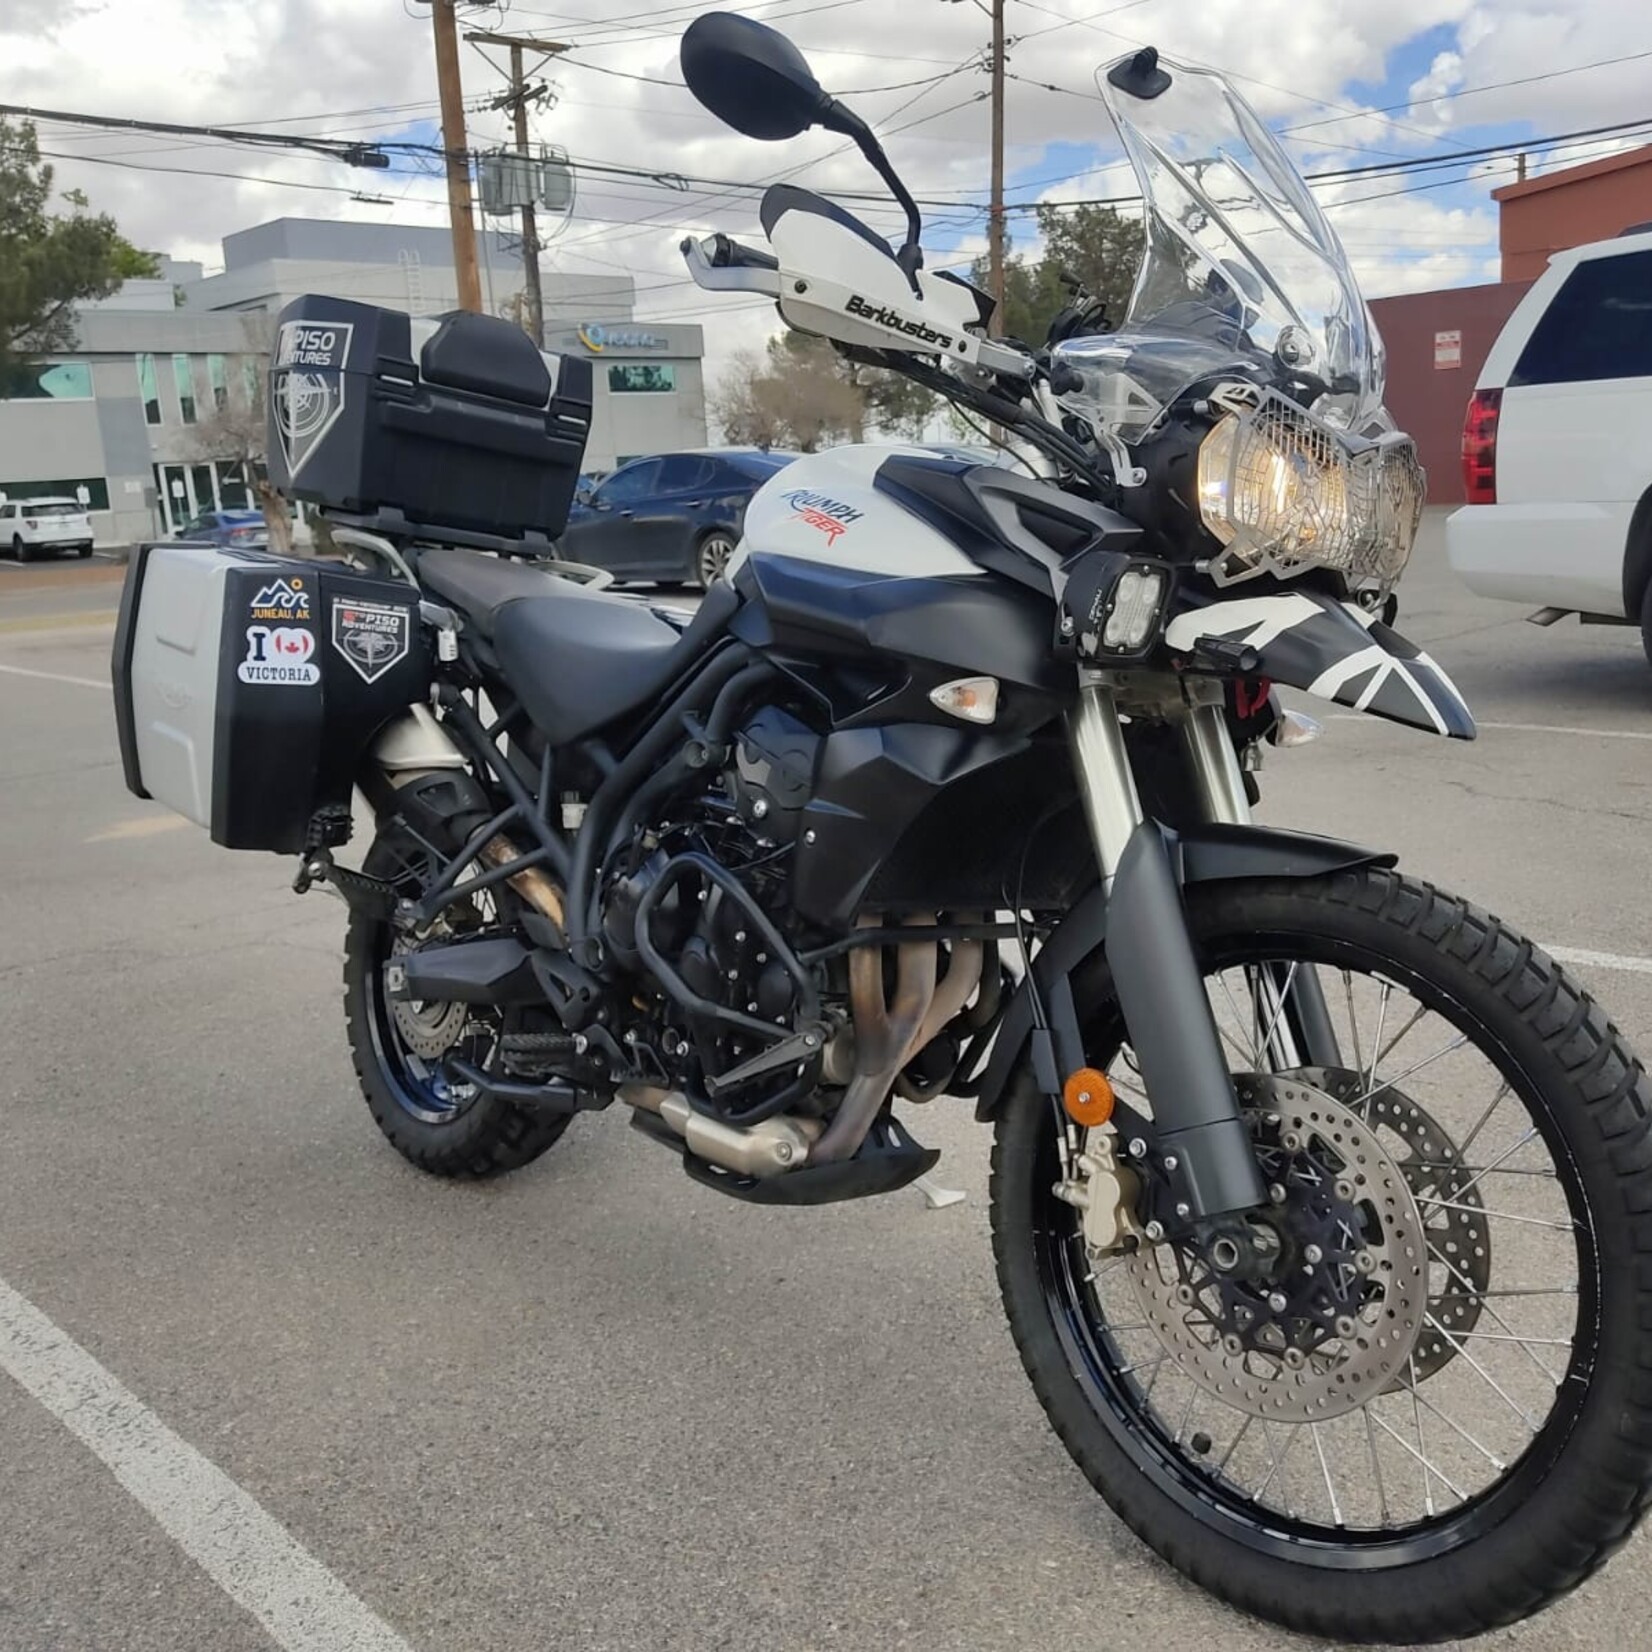 2014 Triumph Tiger 800 XC ABS Adventure Motorcycle for Sale